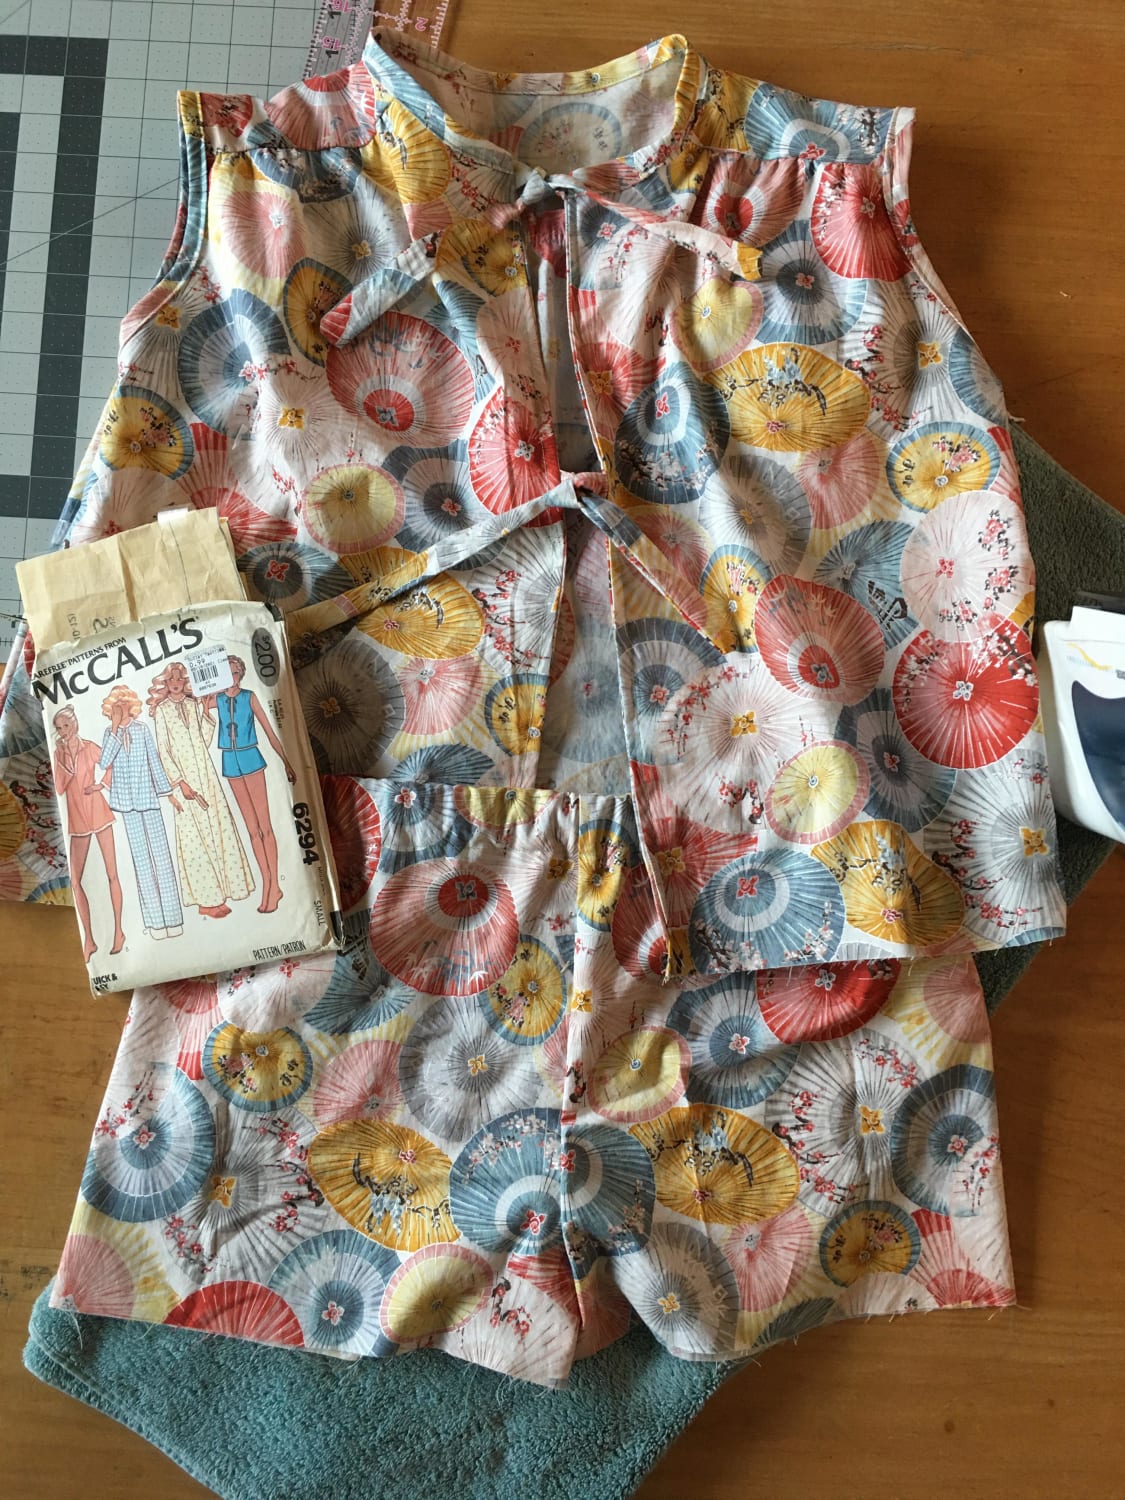 McCall’s 6294 pajamas pattern from 1978! I found the pattern at goodwill. Fabric is from Joann.